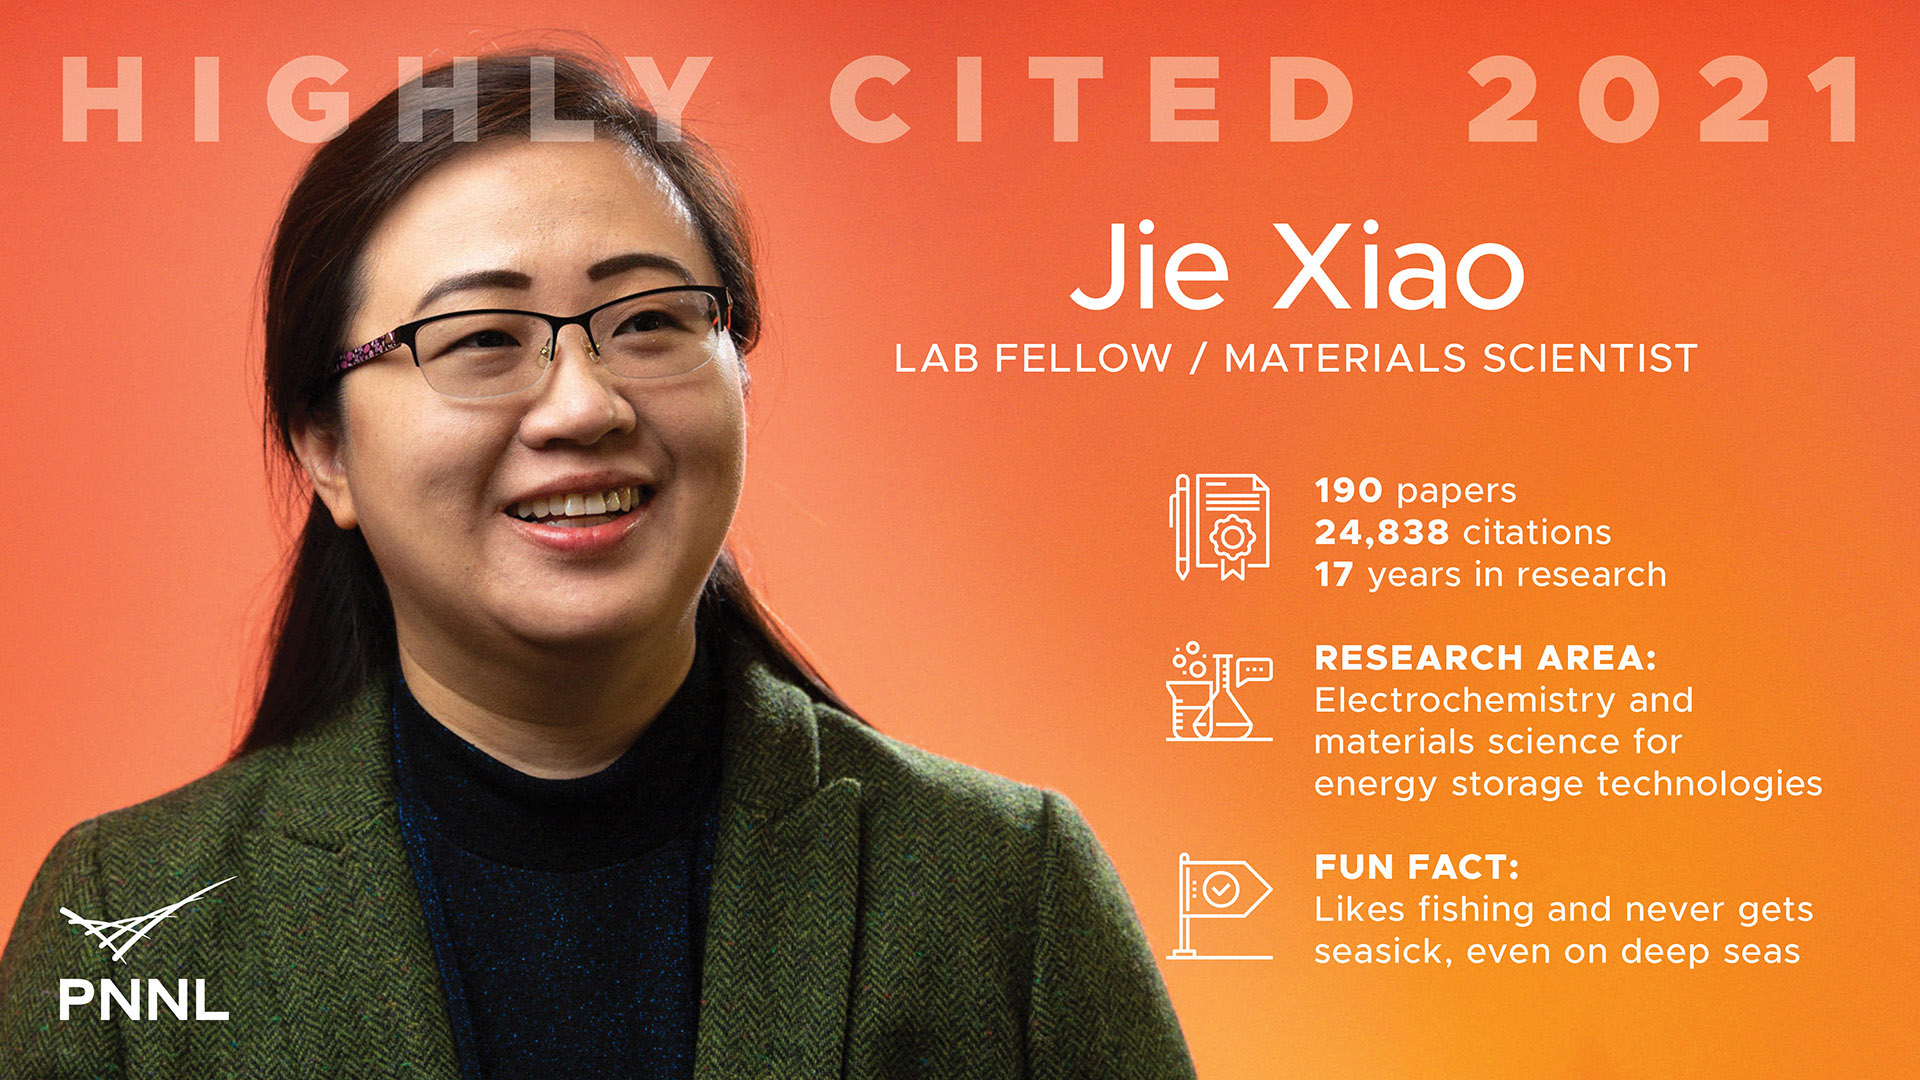 Jie Xiao Highly Cited 2021 Fact Card